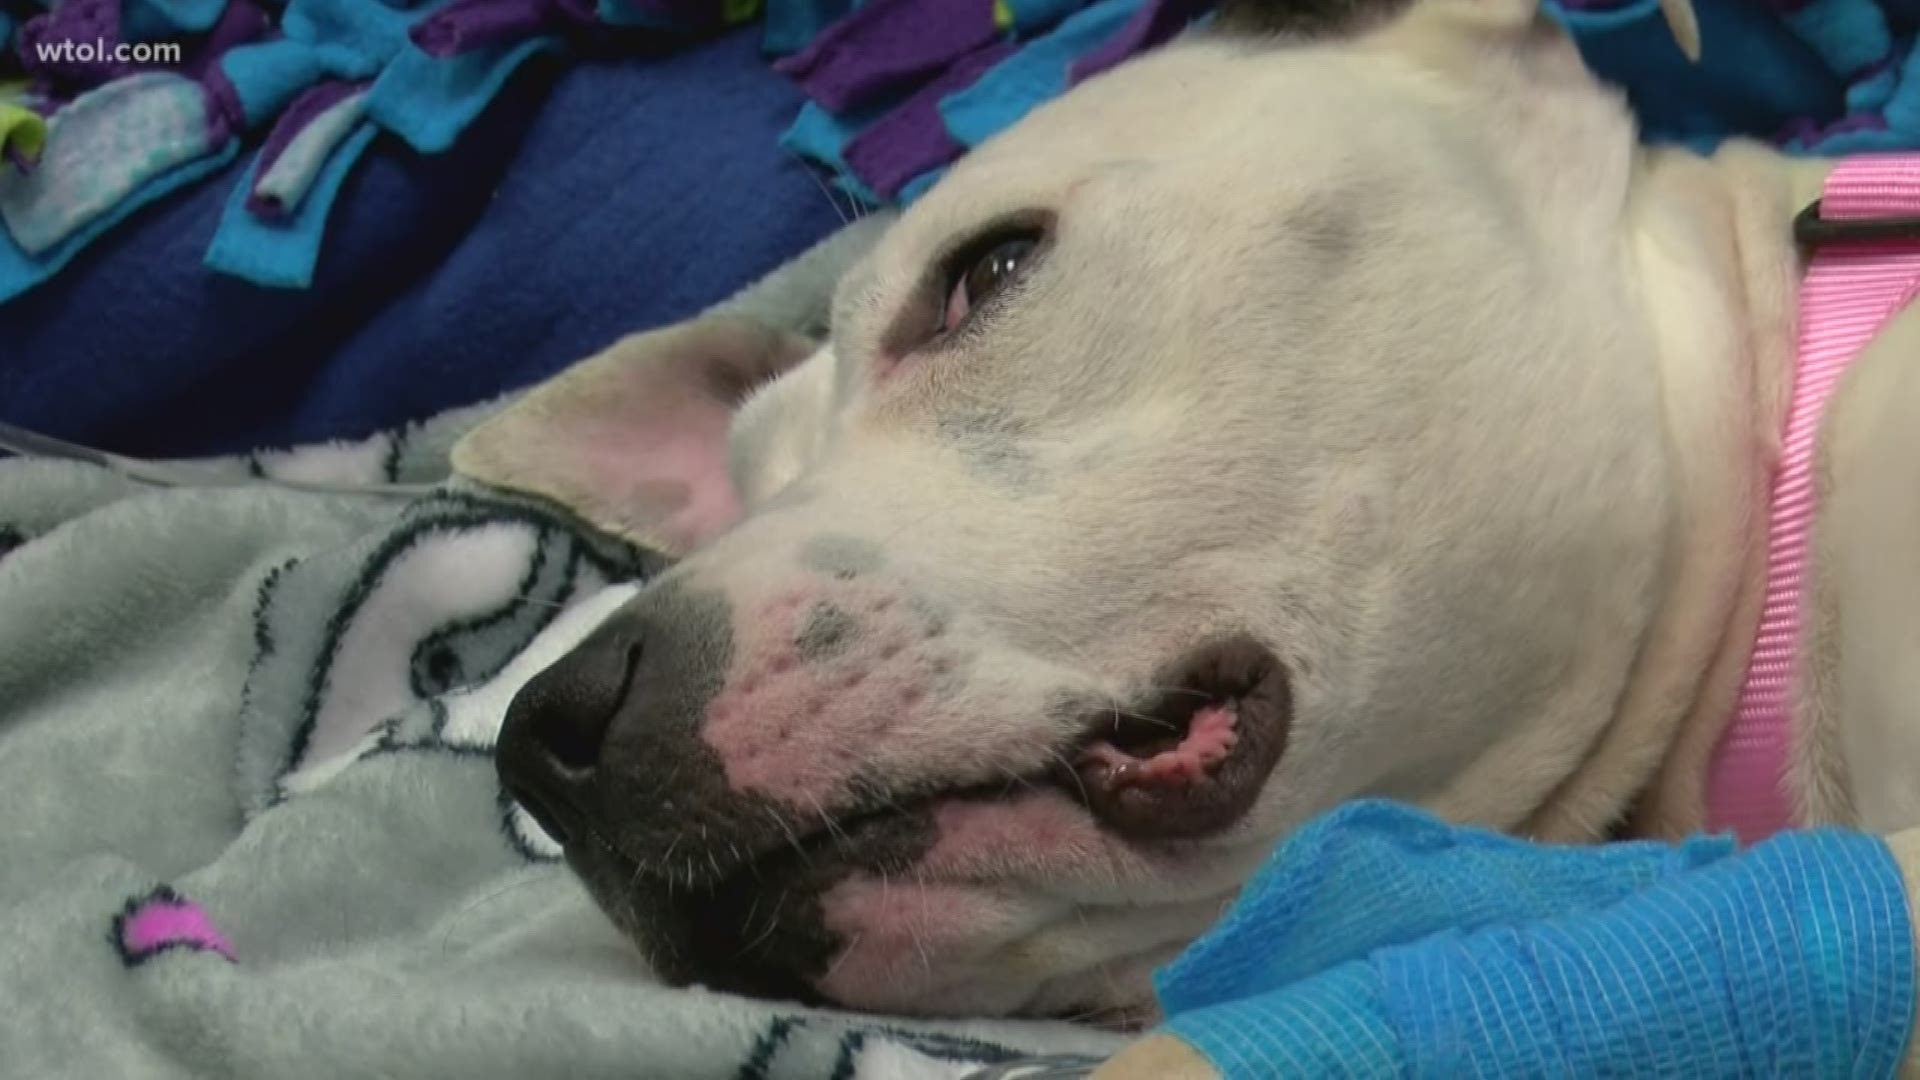 Authorities are seeking for dog's former owner, who is believed to have abandoned the dog while she was giving birth.